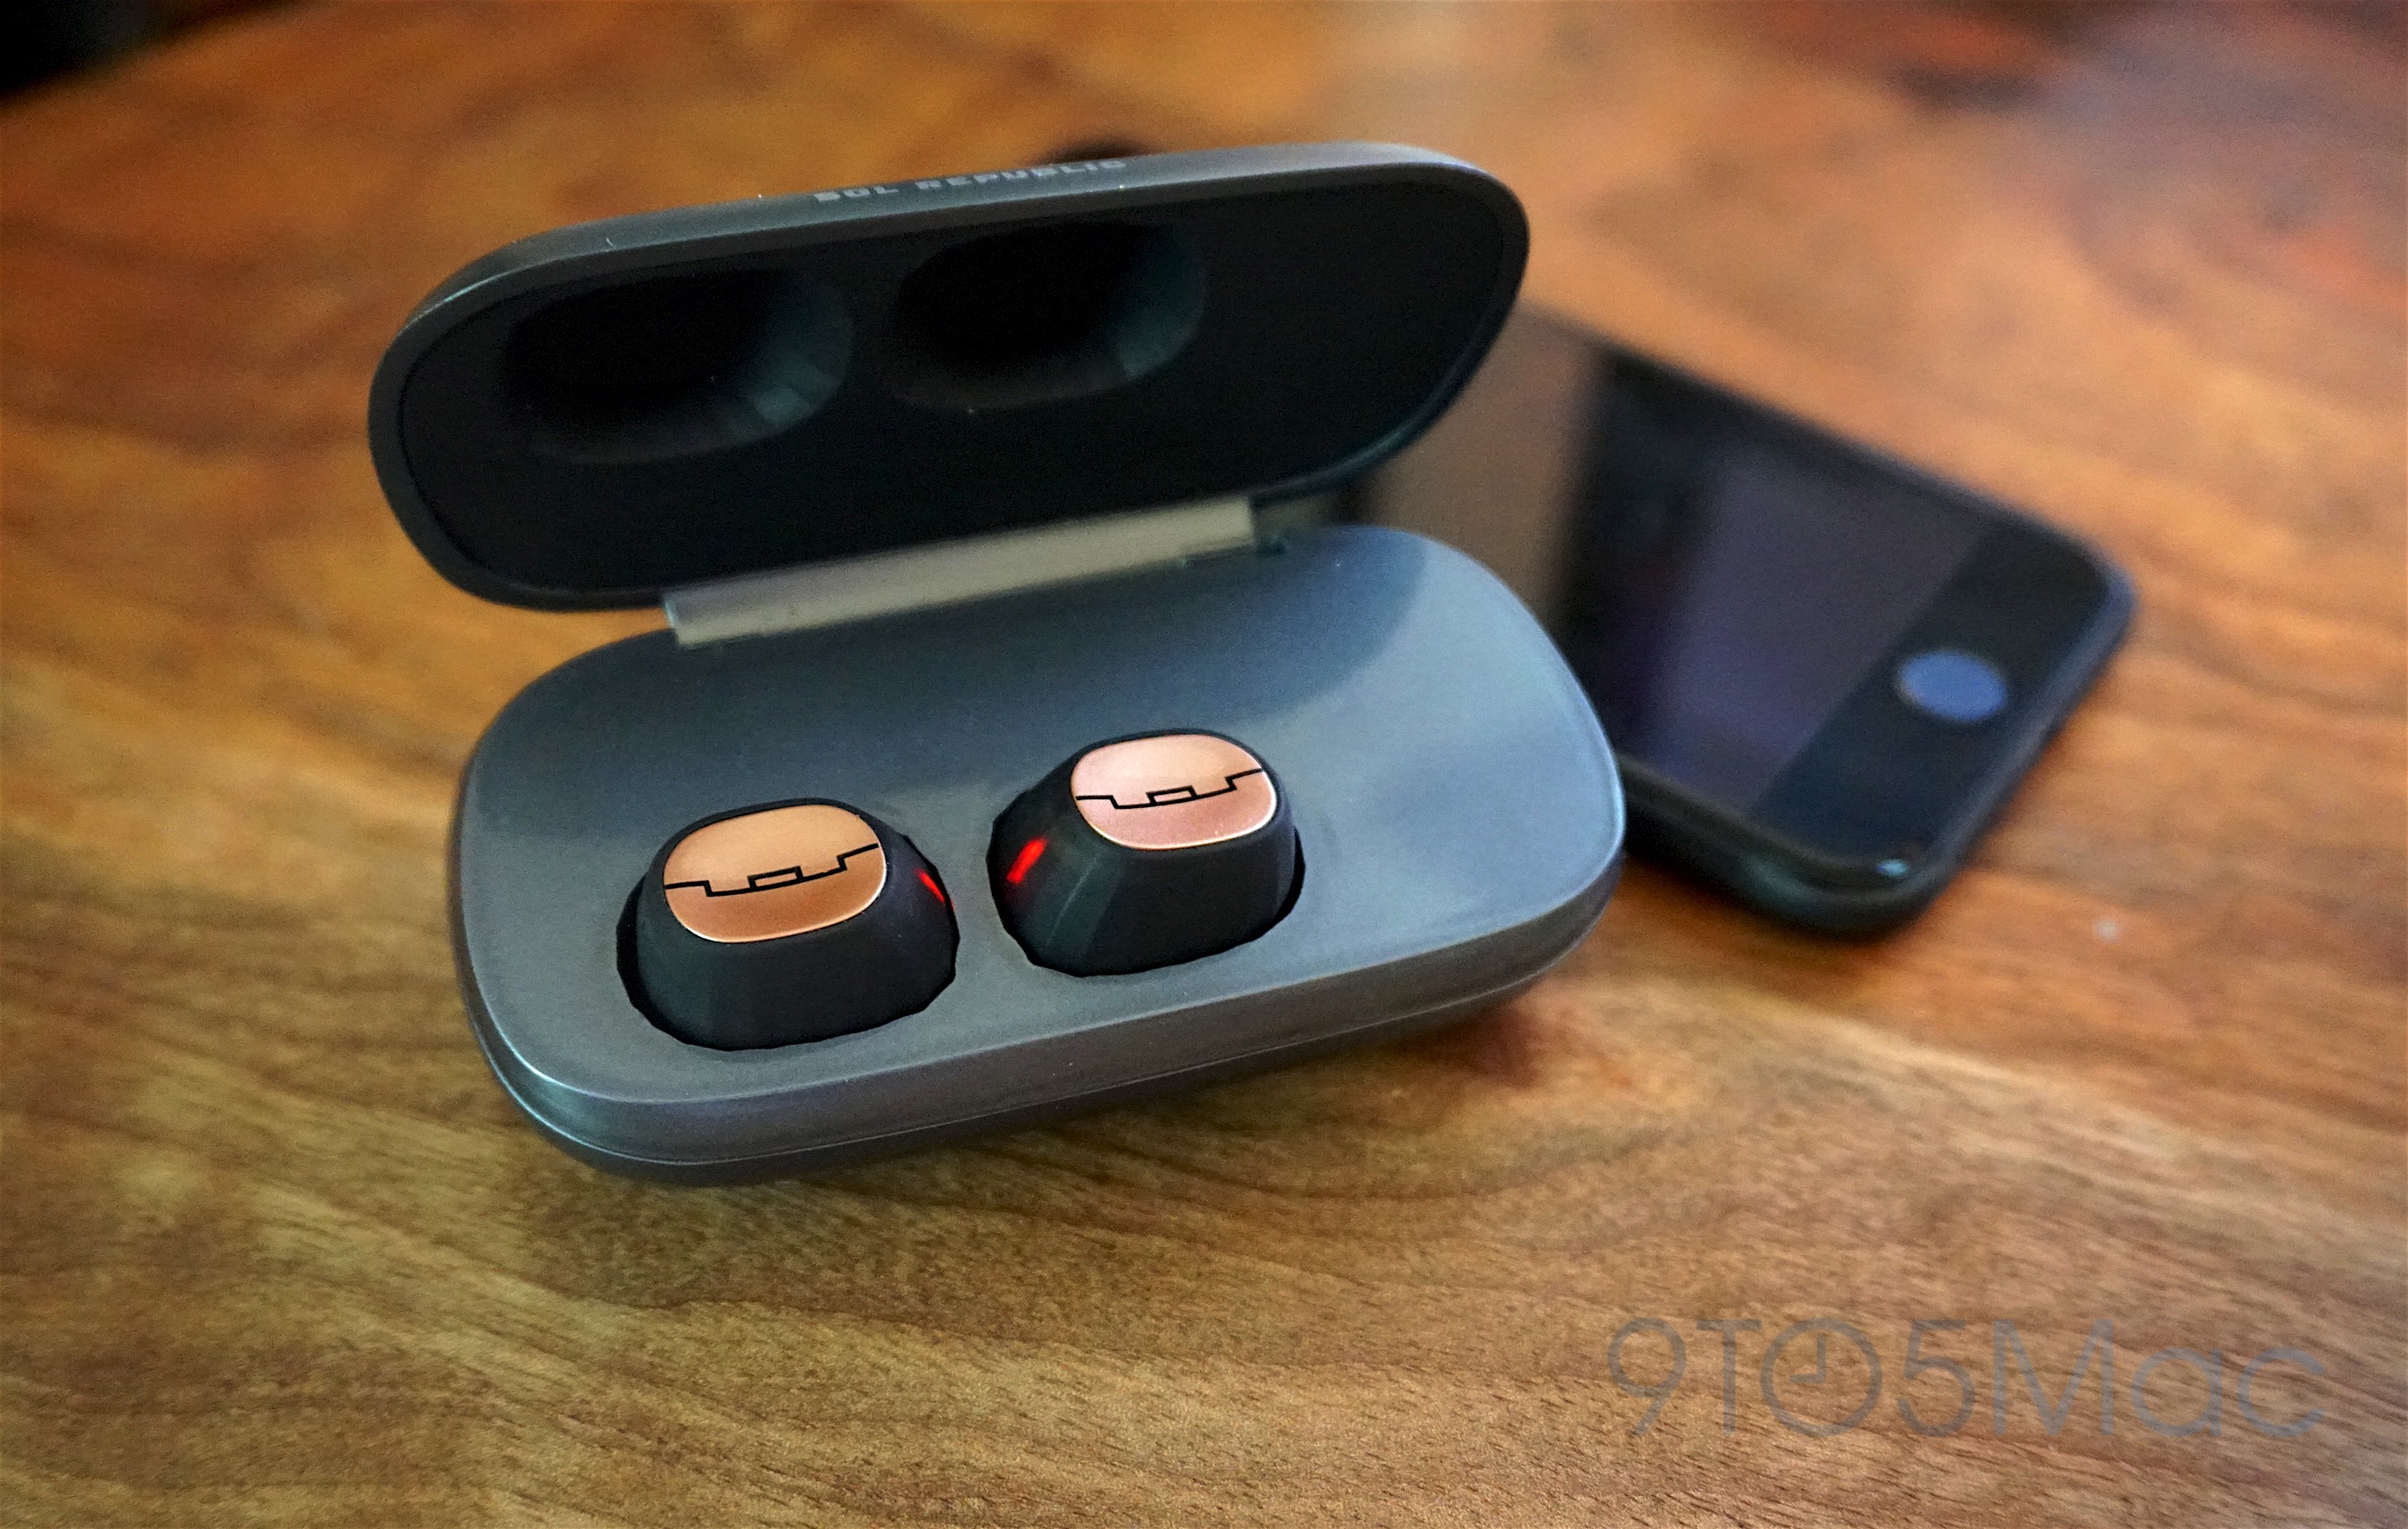 how can i connect my wireless earbuds to airplane audio